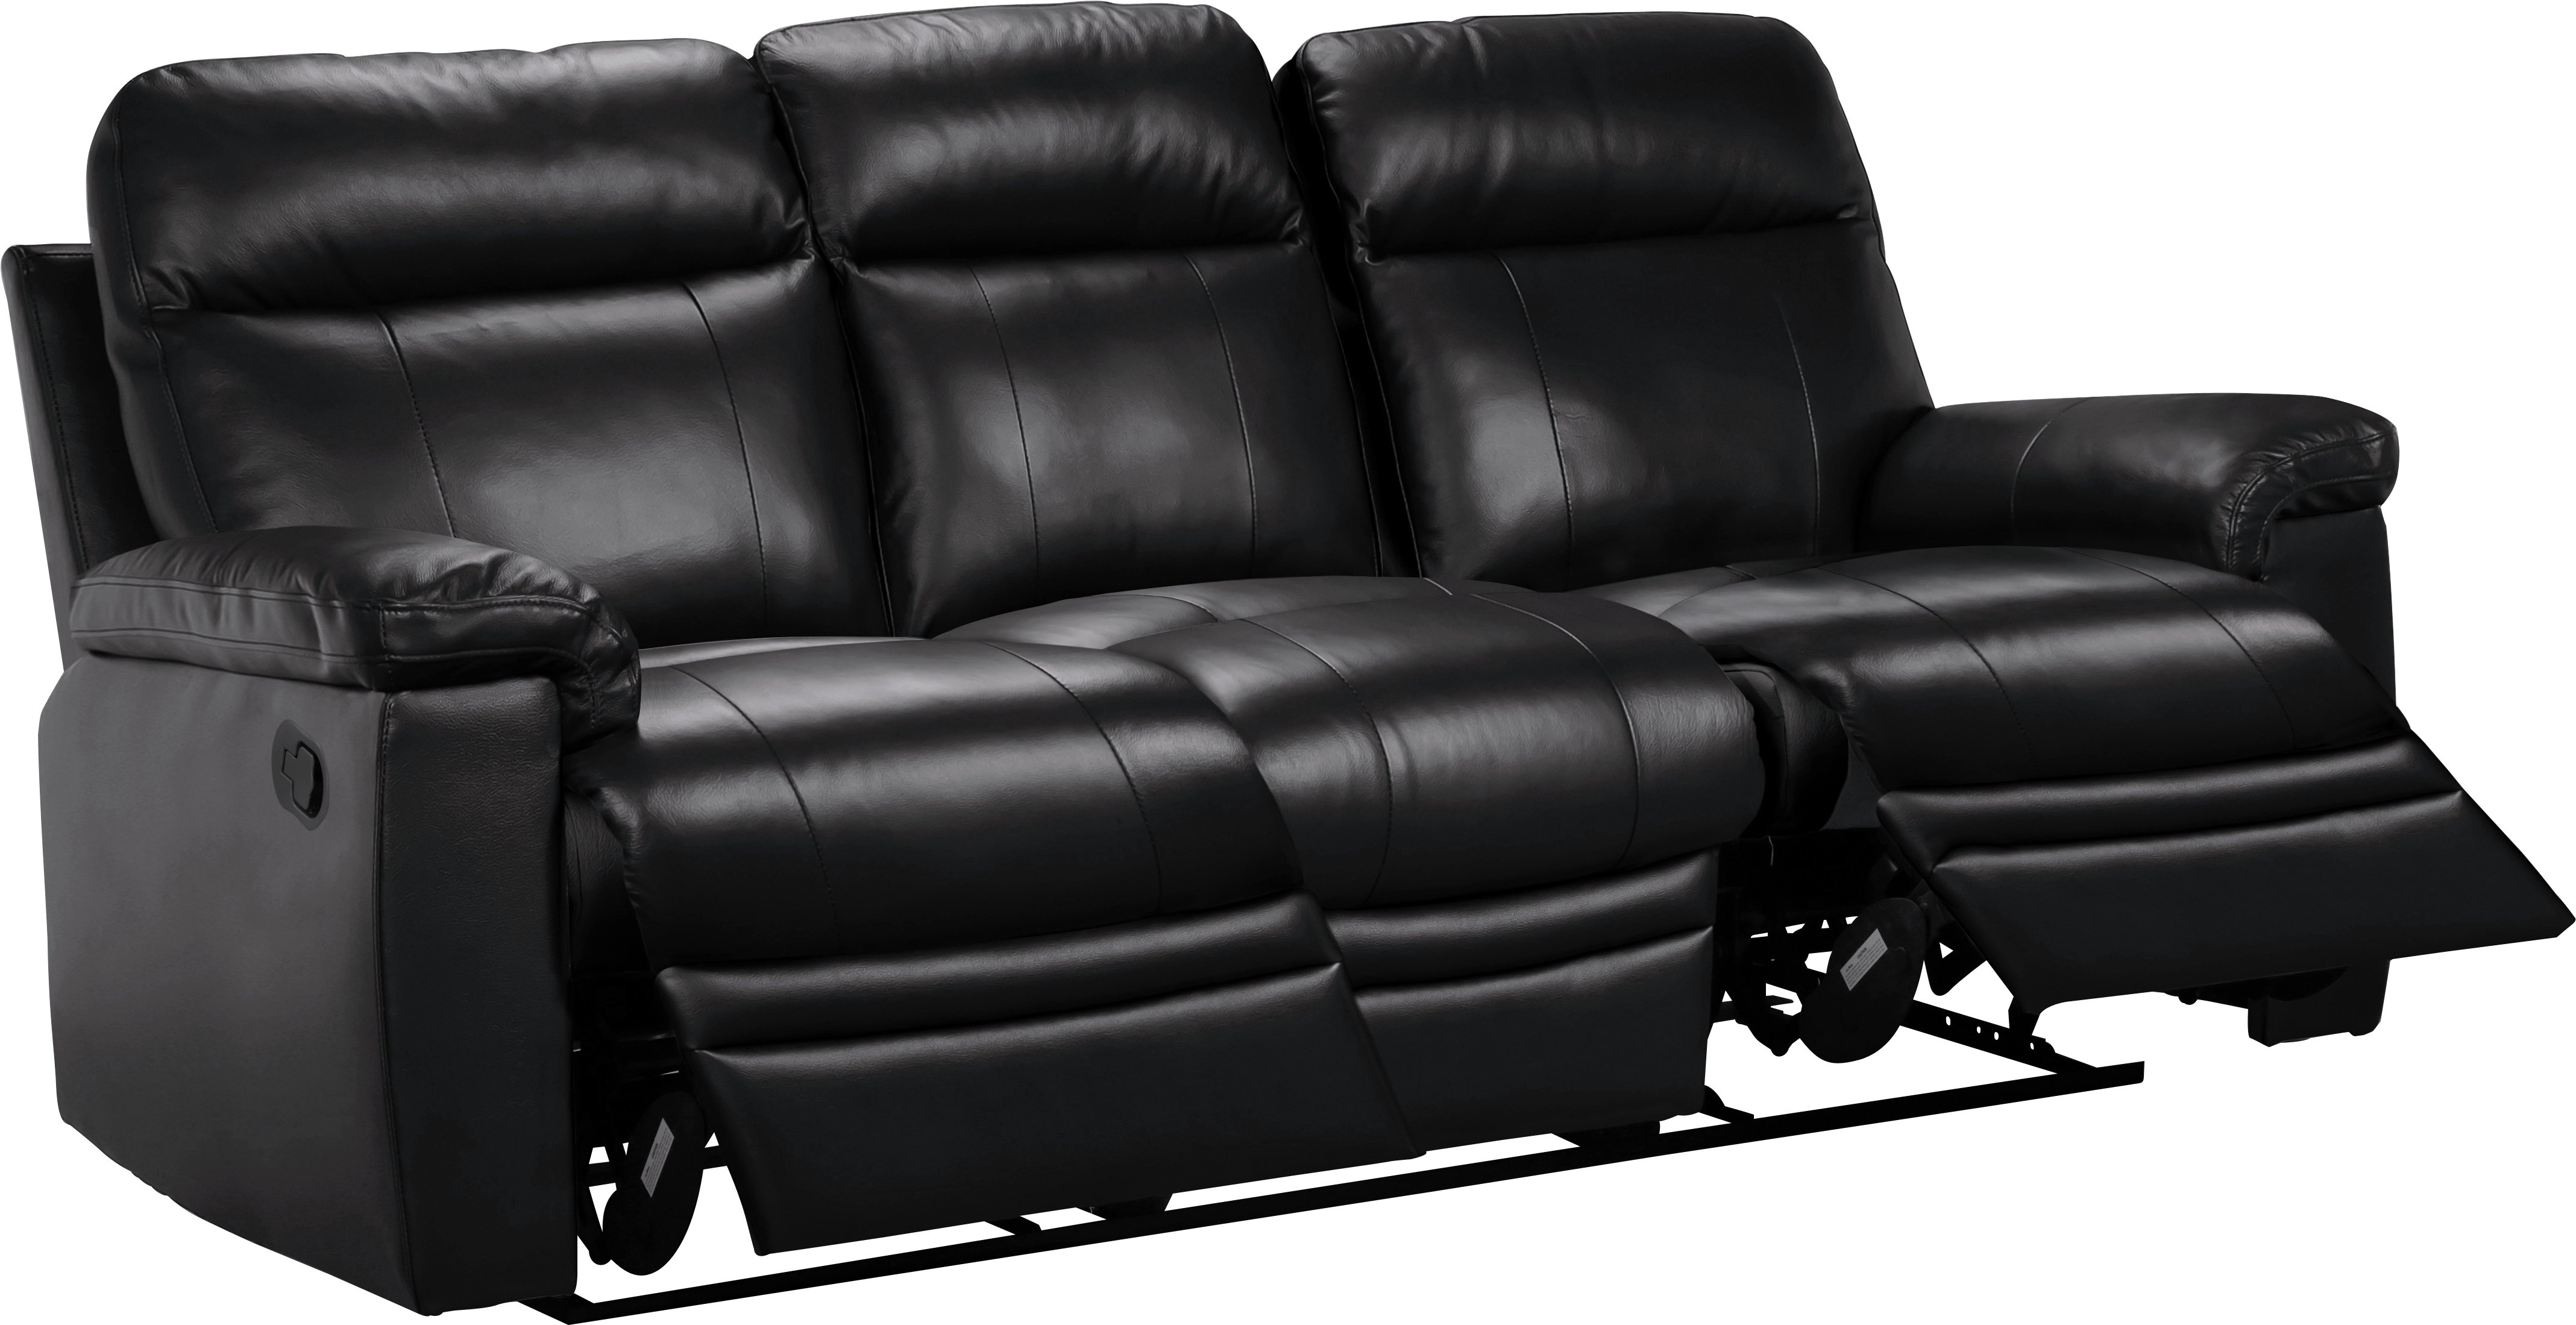 Argos Home New Paolo 3 Seater Manual Recliner Sofa - Black